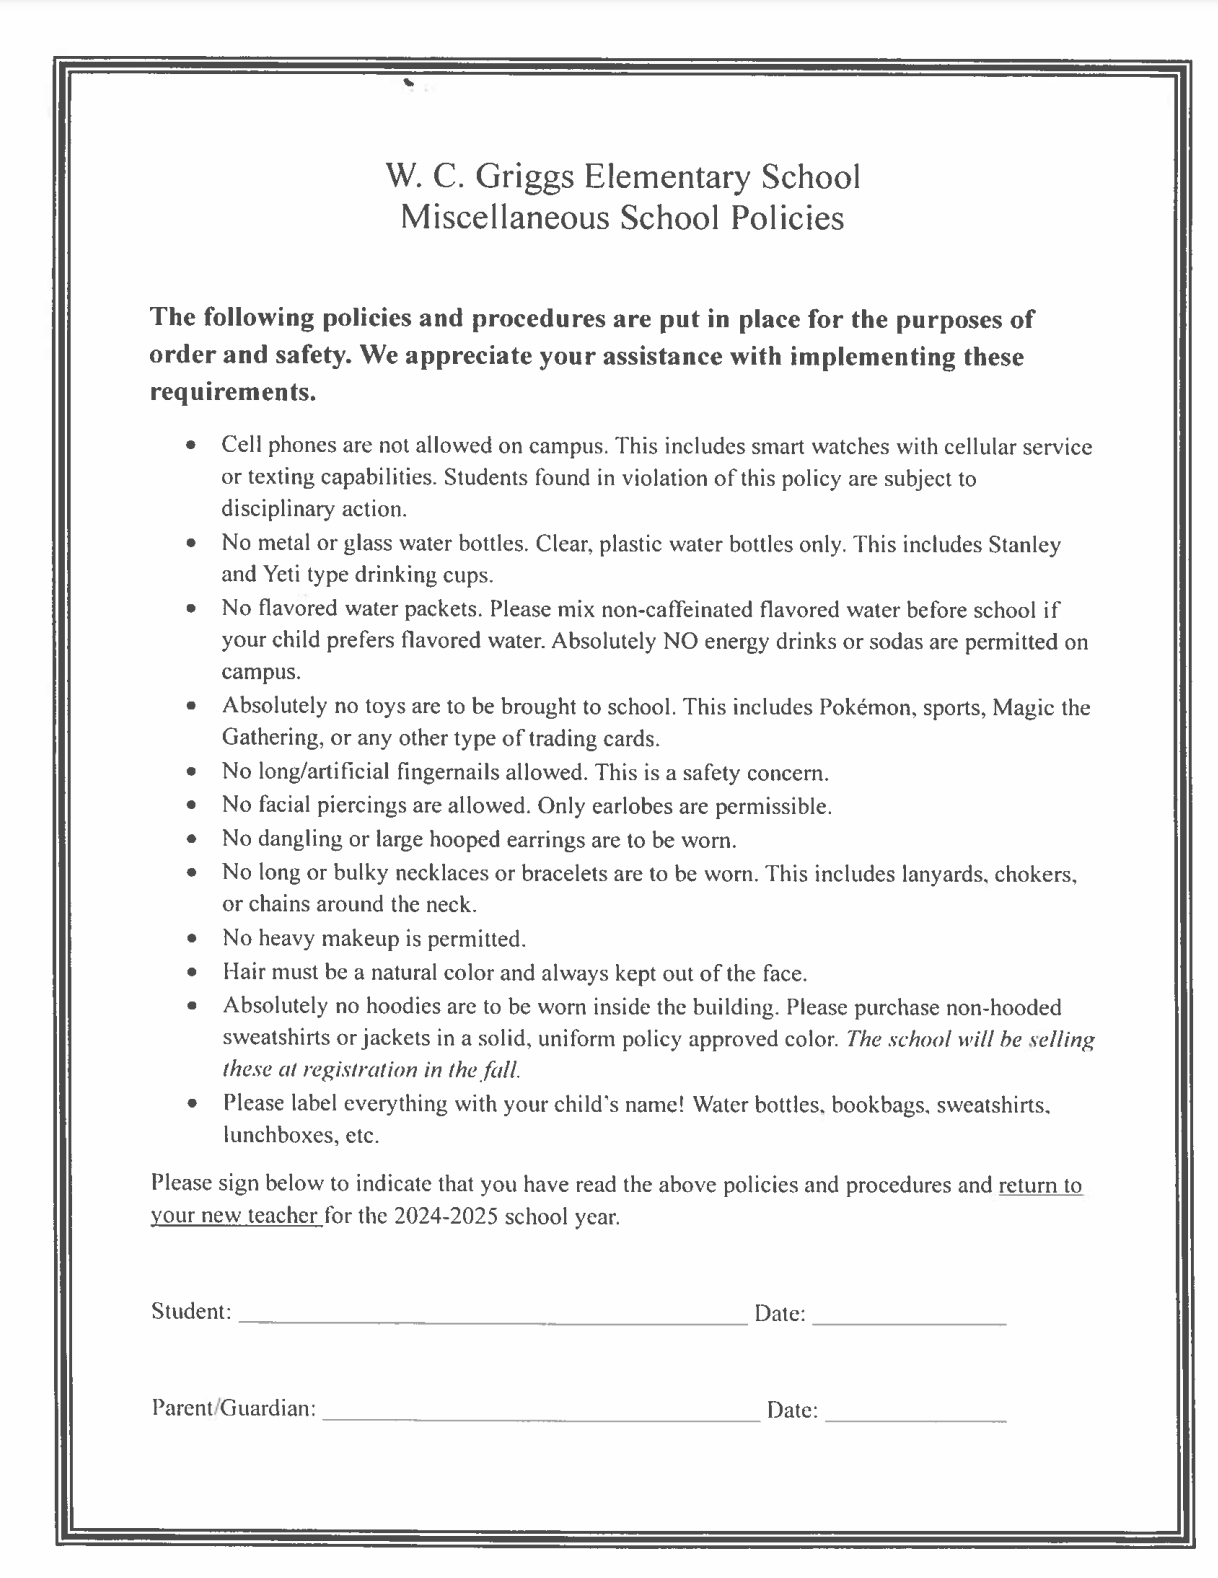 Misc. school policies for the 2024-2025 school year